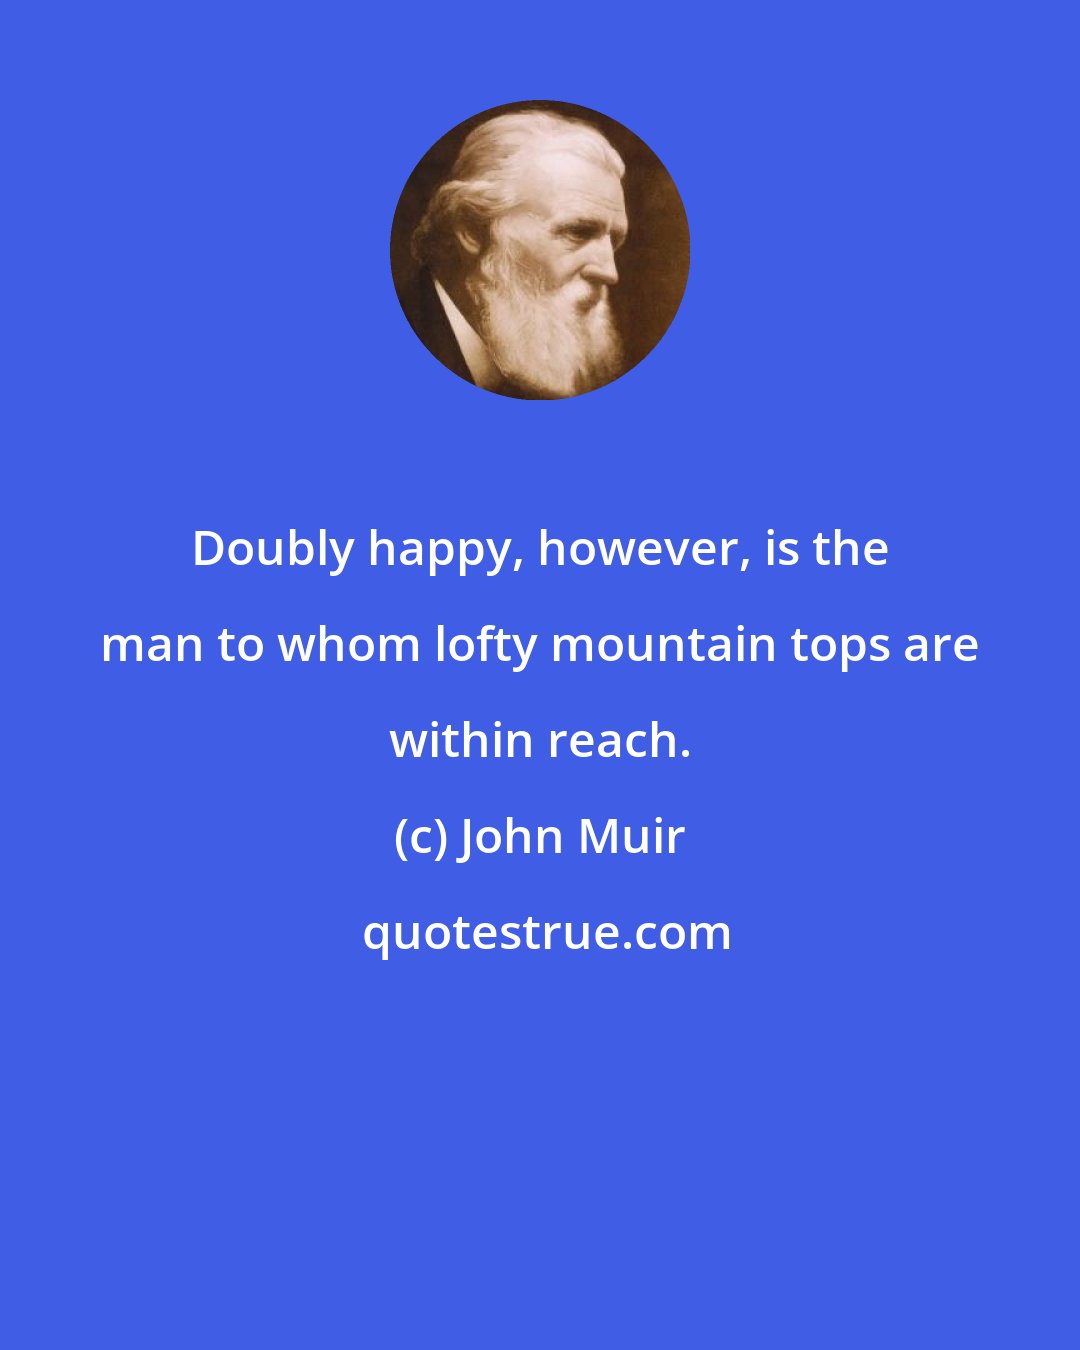 John Muir: Doubly happy, however, is the man to whom lofty mountain tops are within reach.